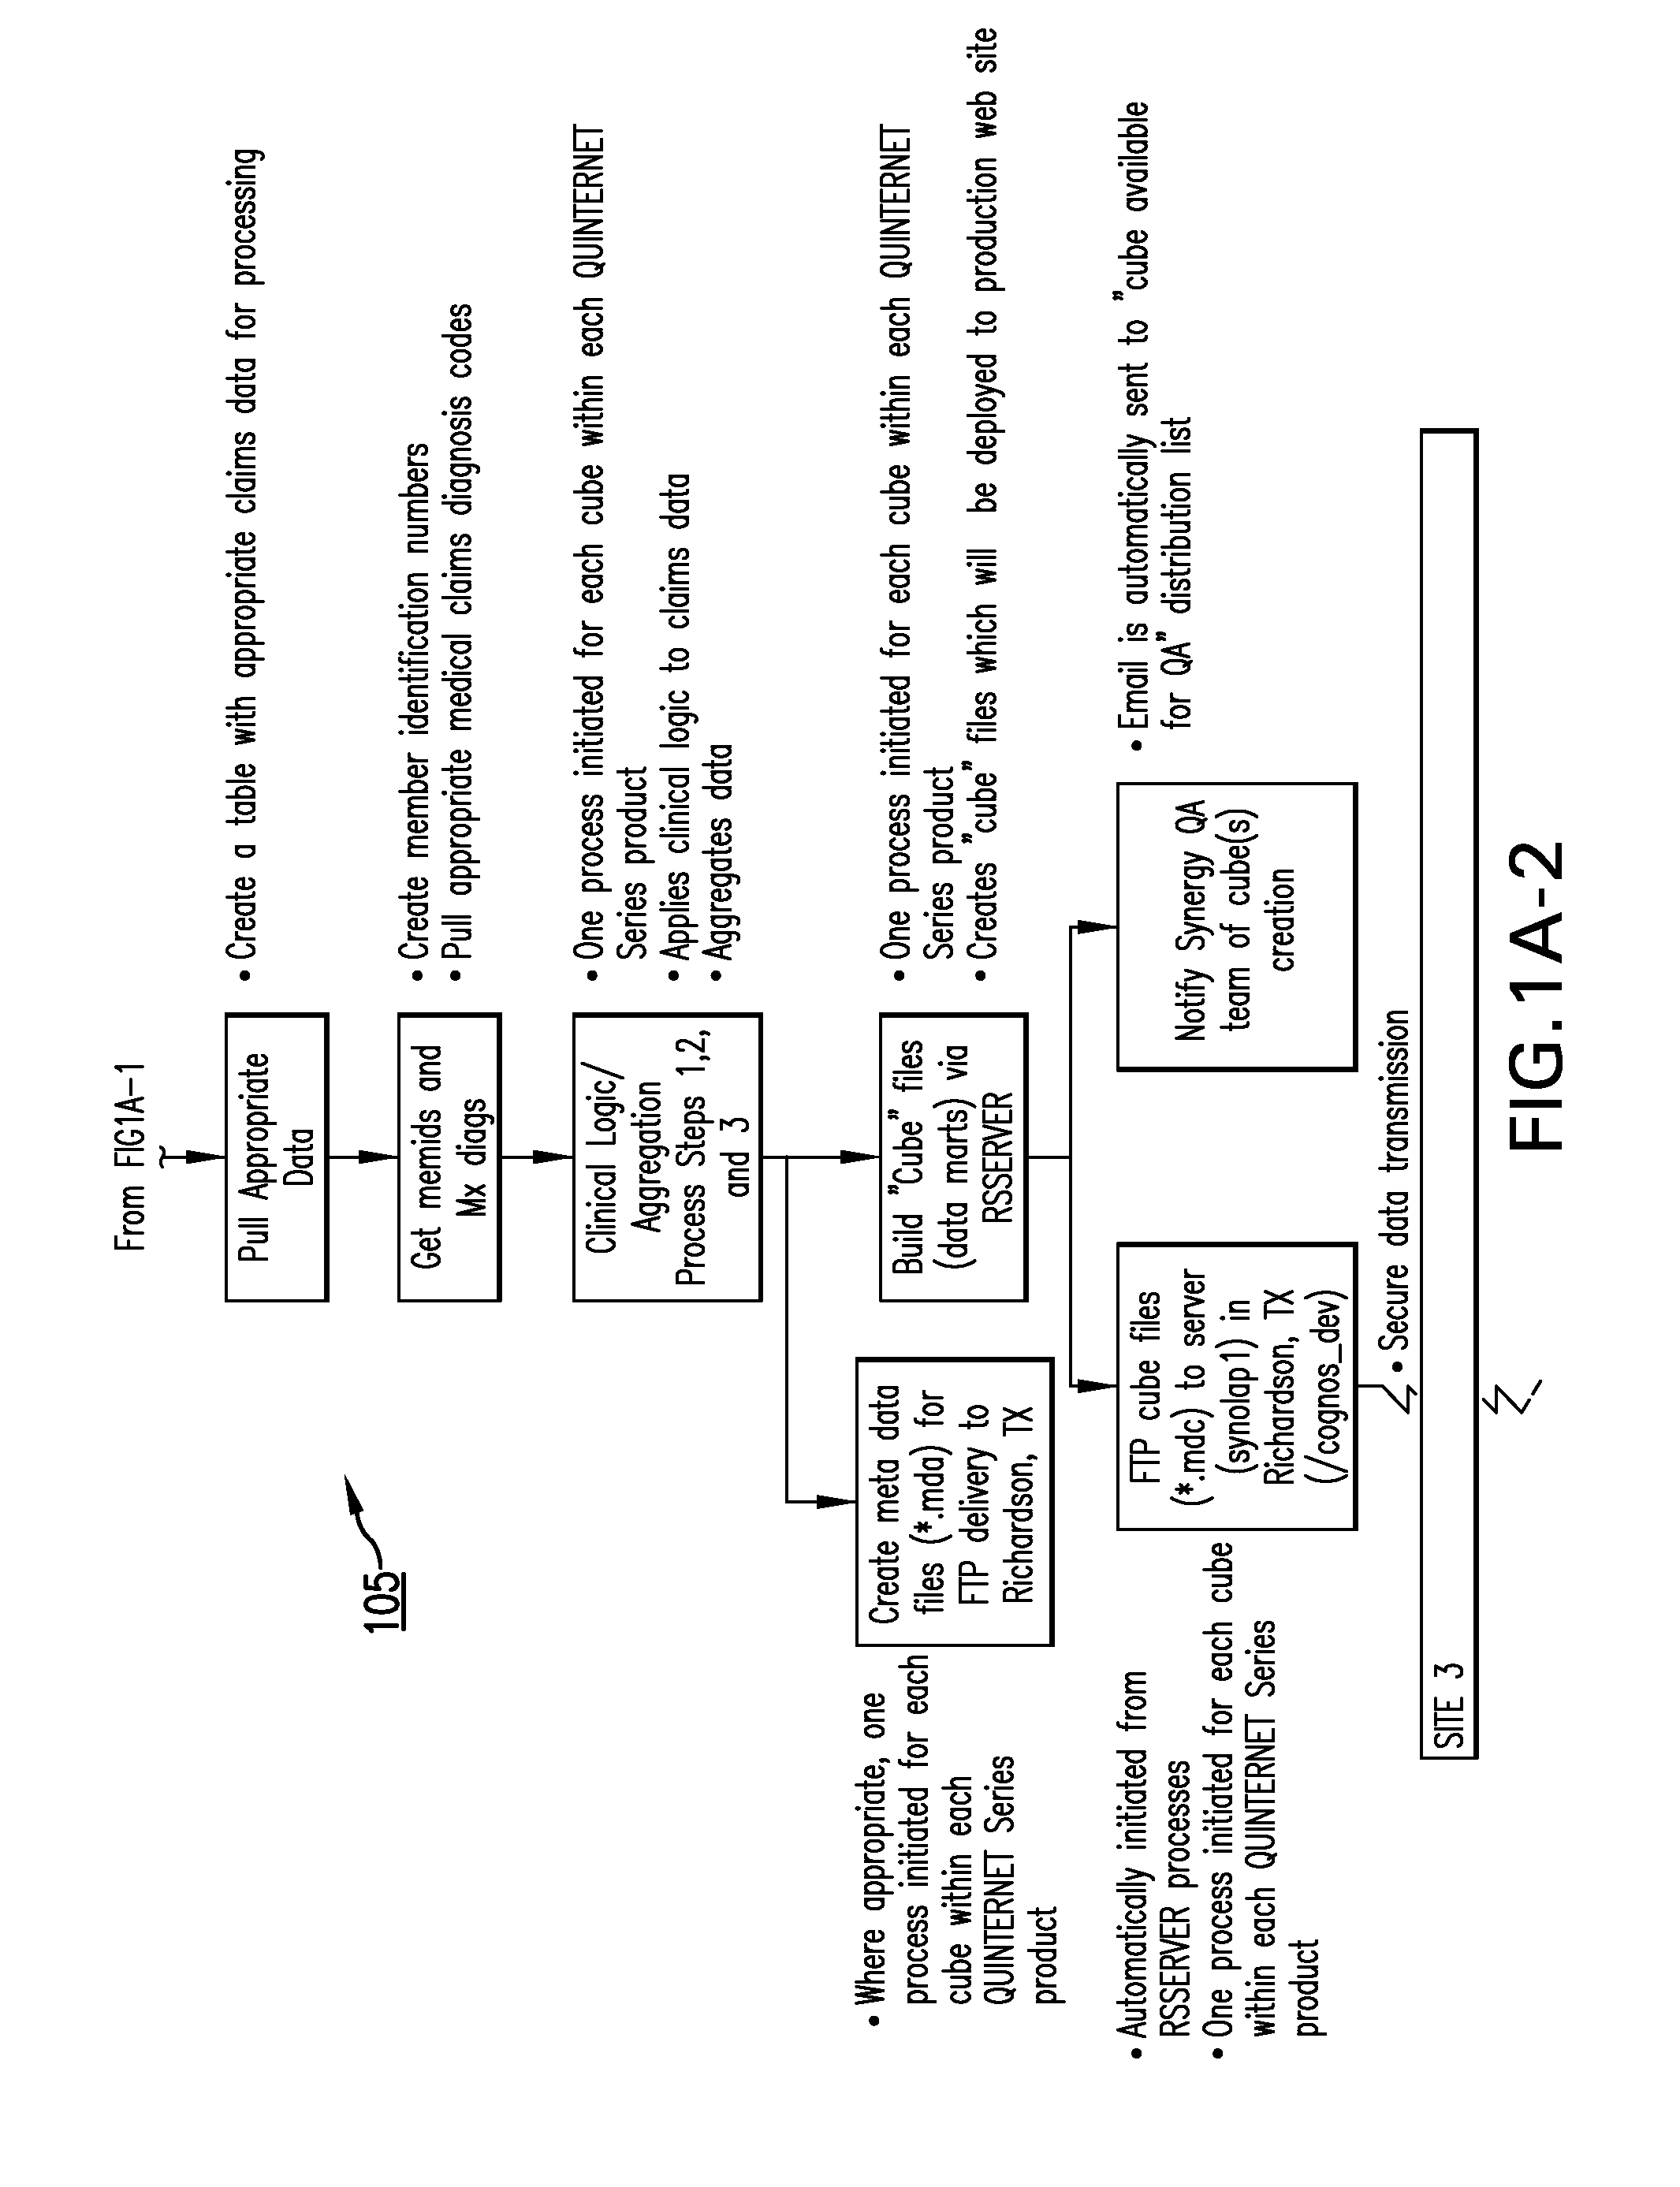 System and method for generating de-identified health care data